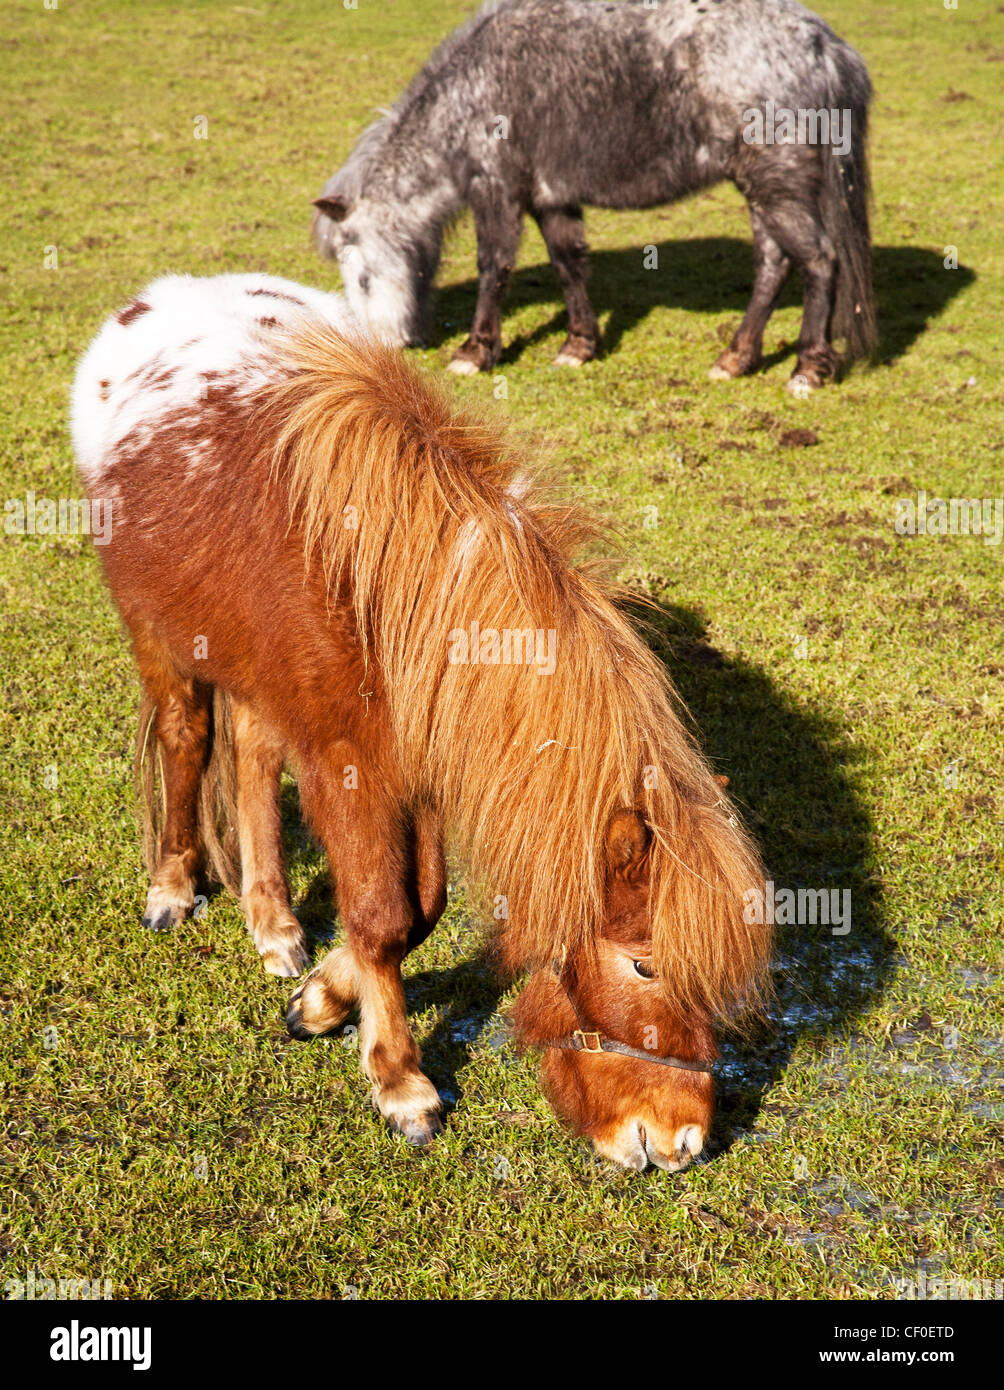 A pair of Falabella miniature horses, grazing on grass. Stock Photo